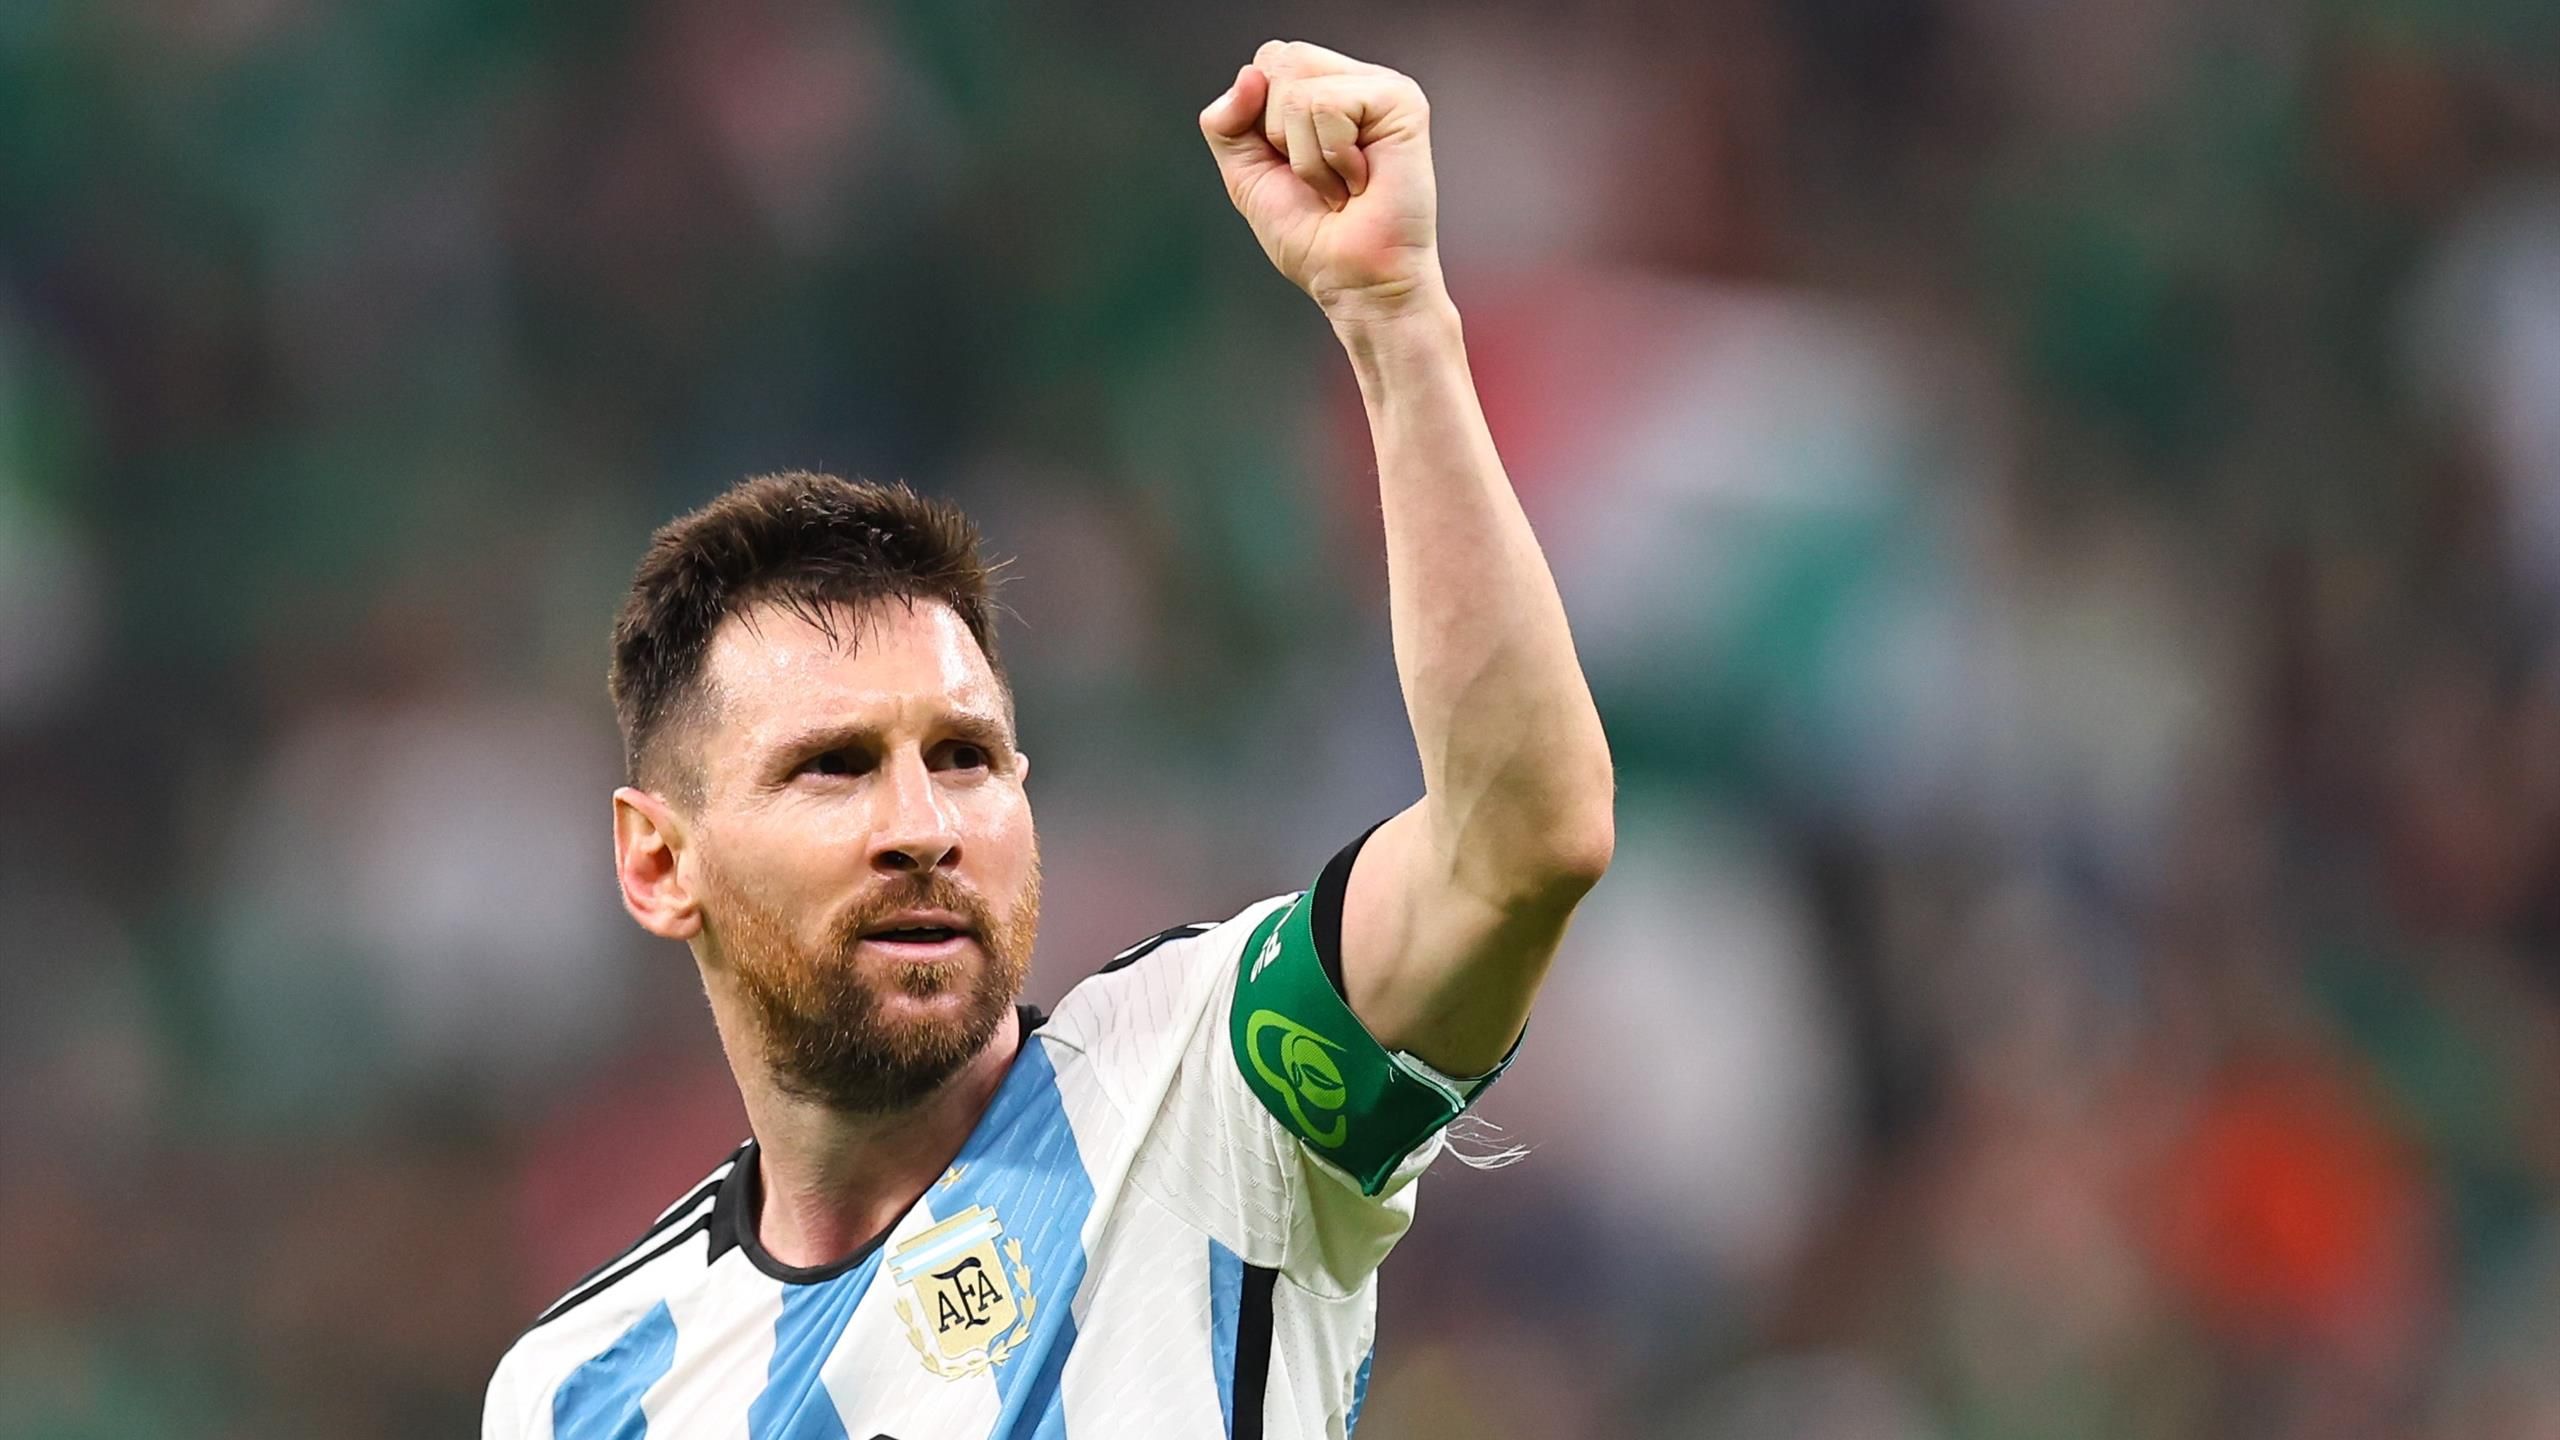 Today another World Cup starts - Lionel Messi backs revamped Argentina side to challenge in Qatar following poor start